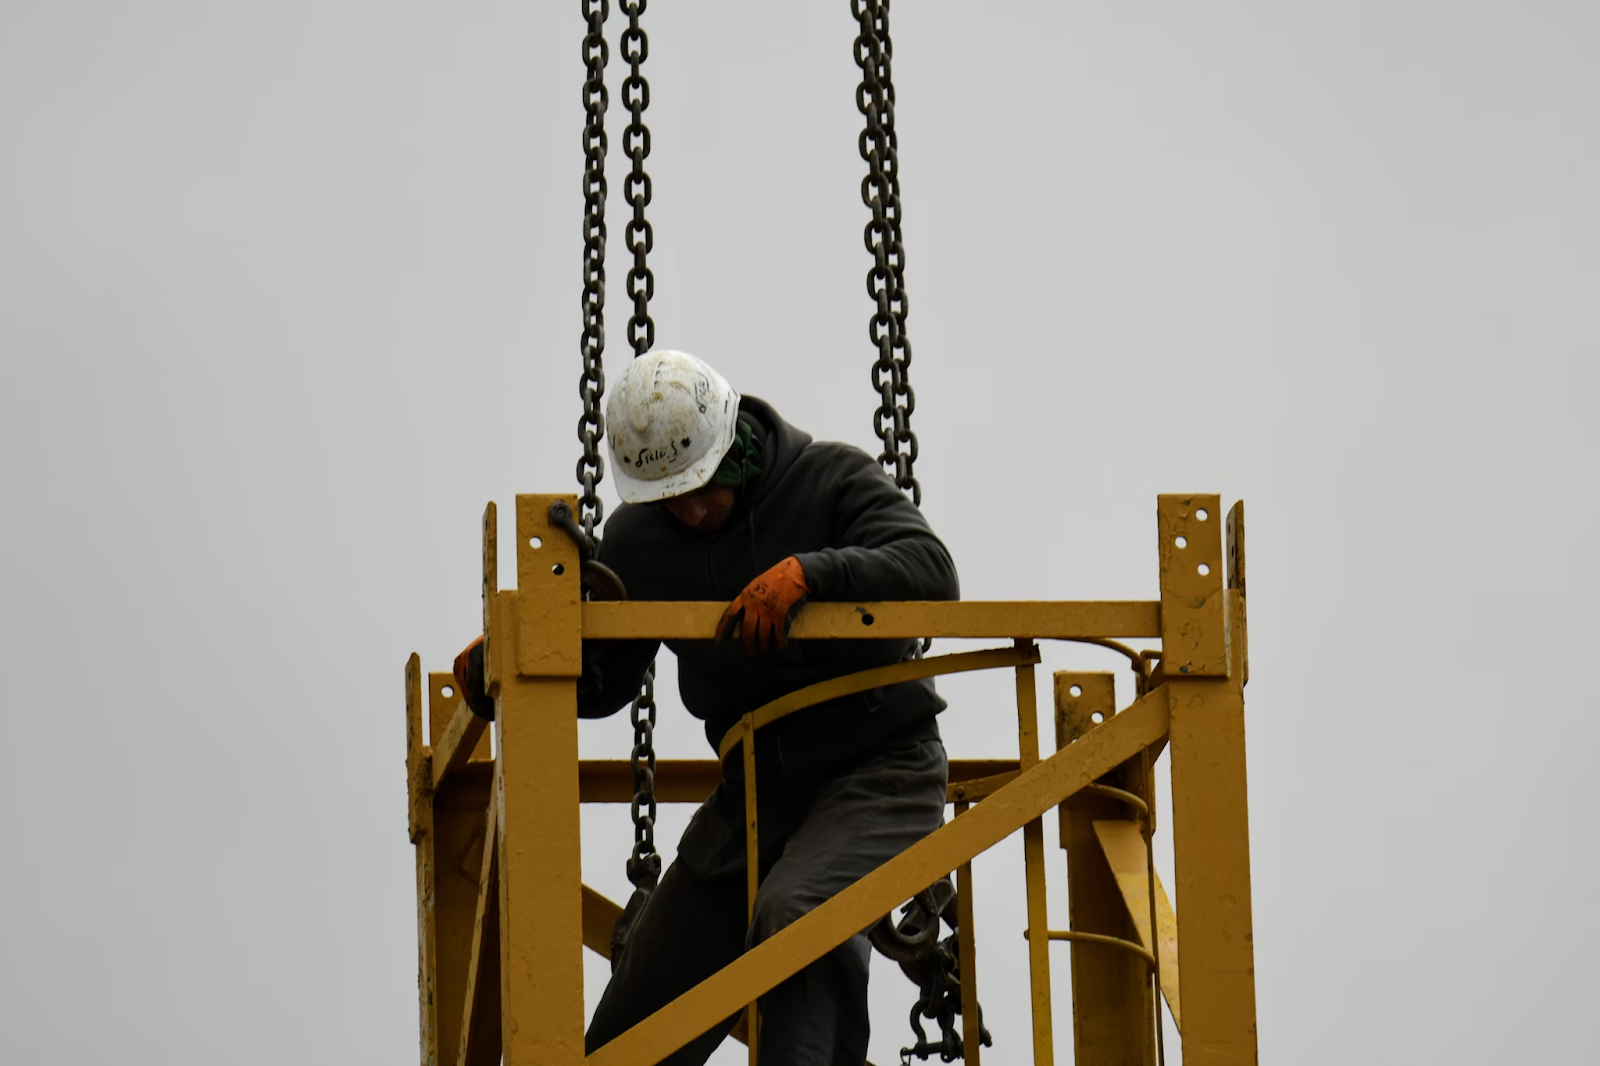 How to Maintain a Safe Work Environment for Lifting: Top 6 Tips 1